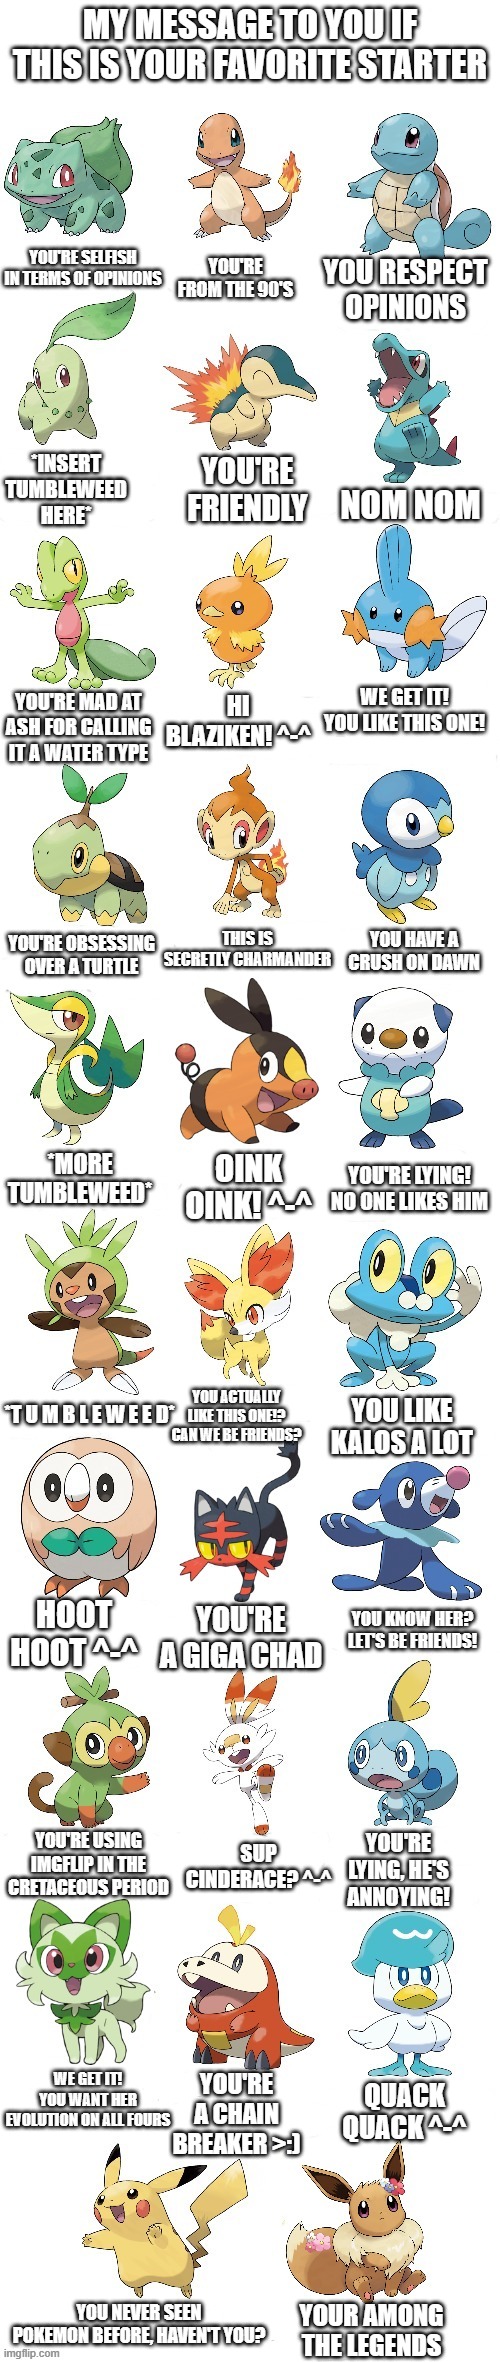 No hate plz. I spent like an hour on this. | MY MESSAGE TO YOU IF THIS IS YOUR FAVORITE STARTER; YOU'RE SELFISH IN TERMS OF OPINIONS; YOU'RE FROM THE 90'S; YOU RESPECT OPINIONS; *INSERT TUMBLEWEED HERE*; YOU'RE FRIENDLY; NOM NOM; HI BLAZIKEN! ^-^; WE GET IT! YOU LIKE THIS ONE! YOU'RE MAD AT ASH FOR CALLING IT A WATER TYPE; THIS IS SECRETLY CHARMANDER; YOU HAVE A CRUSH ON DAWN; YOU'RE OBSESSING OVER A TURTLE; OINK OINK! ^-^; *MORE TUMBLEWEED*; YOU'RE LYING! NO ONE LIKES HIM; YOU LIKE KALOS A LOT; YOU ACTUALLY LIKE THIS ONE!? CAN WE BE FRIENDS? *T U M B L E W E E D*; YOU KNOW HER? LET'S BE FRIENDS! HOOT HOOT ^-^; YOU'RE A GIGA CHAD; SUP CINDERACE? ^-^; YOU'RE USING IMGFLIP IN THE CRETACEOUS PERIOD; YOU'RE LYING, HE'S ANNOYING! YOU'RE A CHAIN BREAKER >:); WE GET IT! YOU WANT HER EVOLUTION ON ALL FOURS; QUACK QUACK ^-^; YOU NEVER SEEN POKEMON BEFORE, HAVEN'T YOU? YOUR AMONG THE LEGENDS | image tagged in every starter pokemon,memes,pokemon,starters,funny,why are you reading this | made w/ Imgflip meme maker